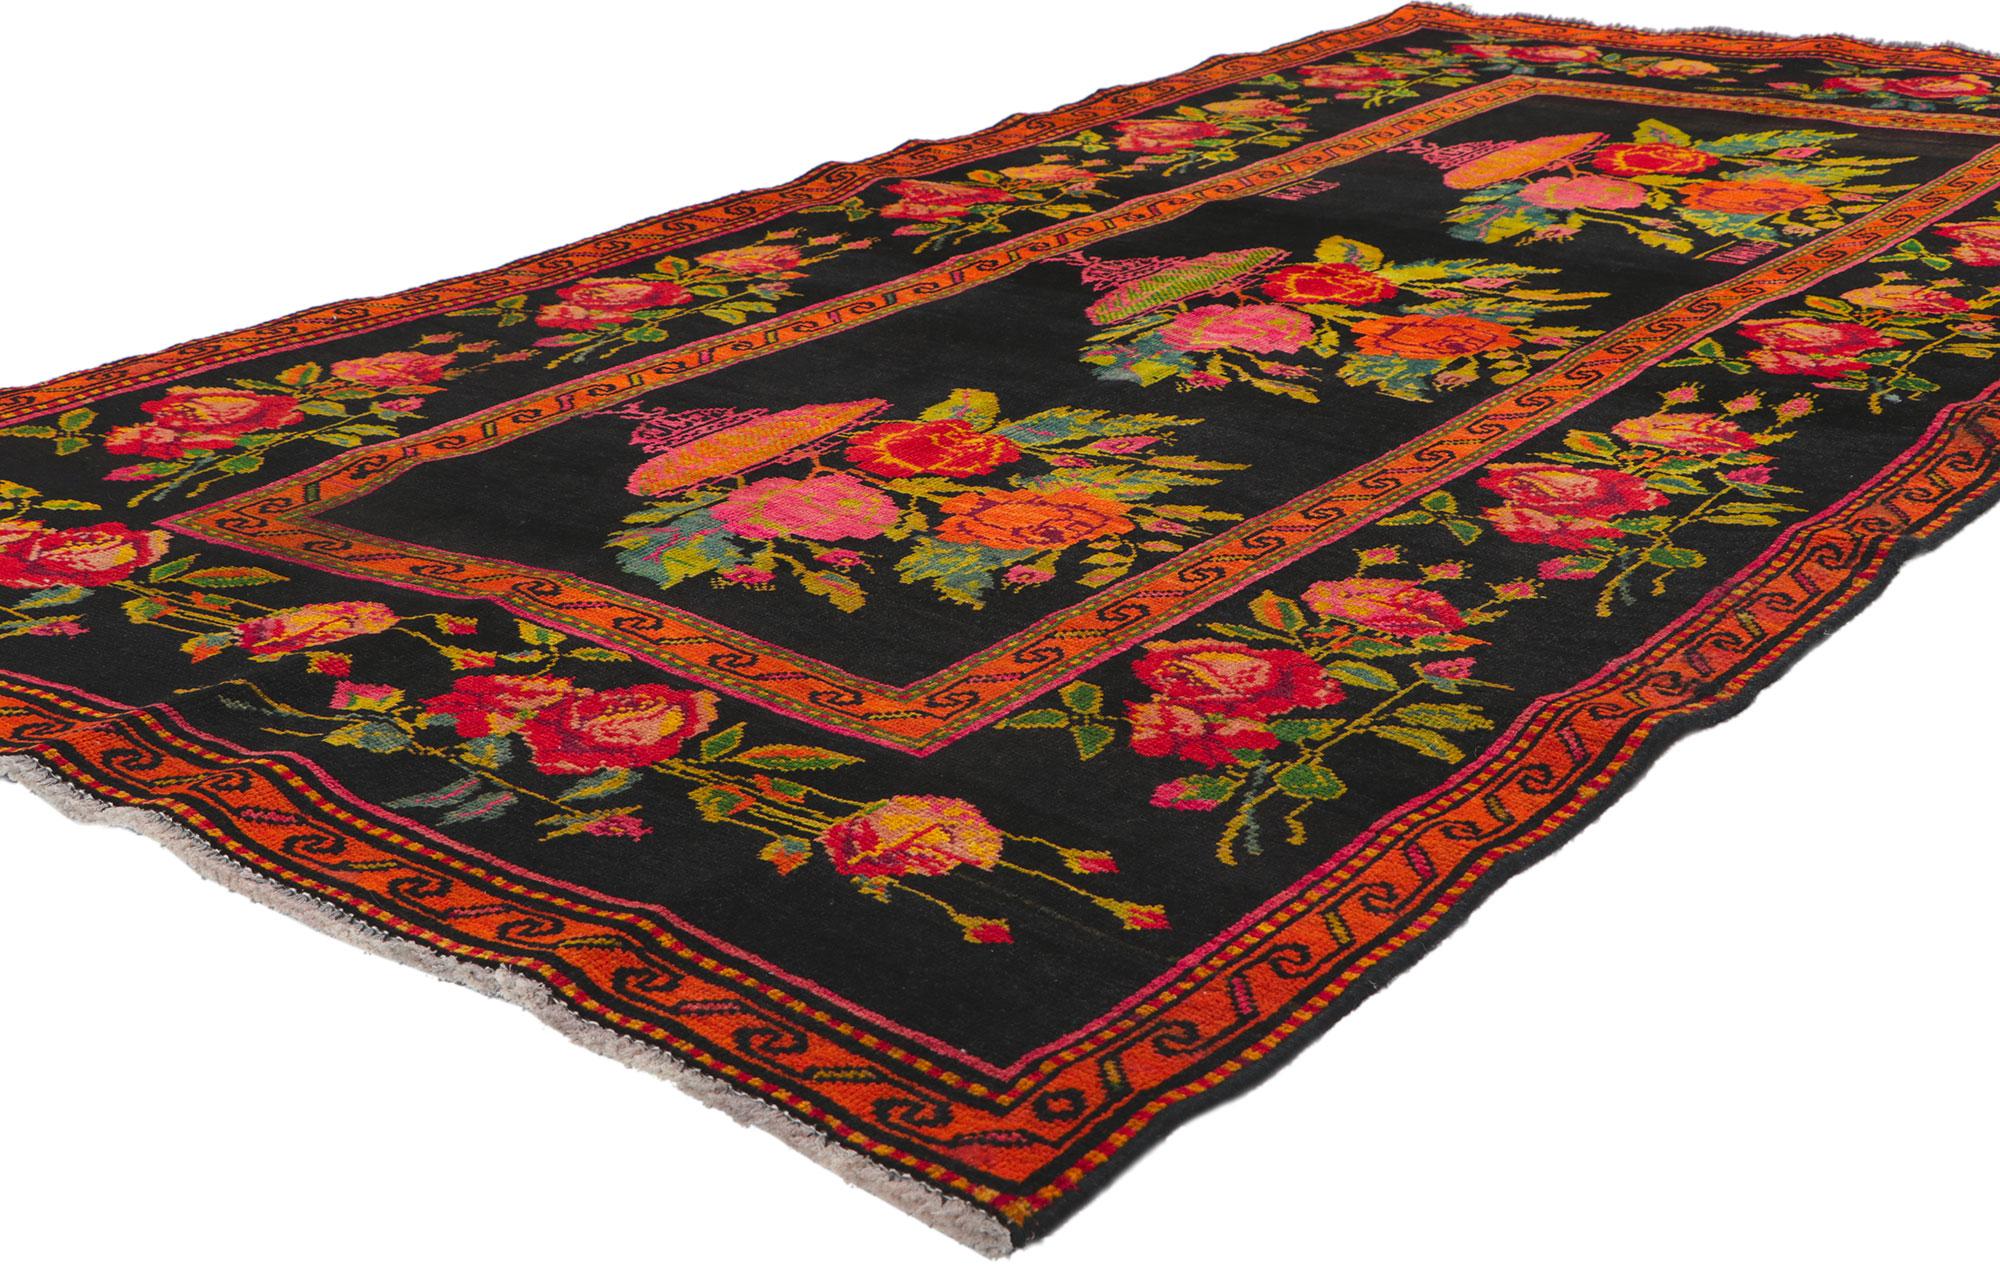 61061 Antique Caucasian Rose Karabagh Rug, 04'03 x 08'03.  Caucasian Karabagh rugs originate from the Karabakh region of the Caucasus, now part of Azerbaijan, and are prized for their intricate geometric designs, vibrant colors, and durable wool